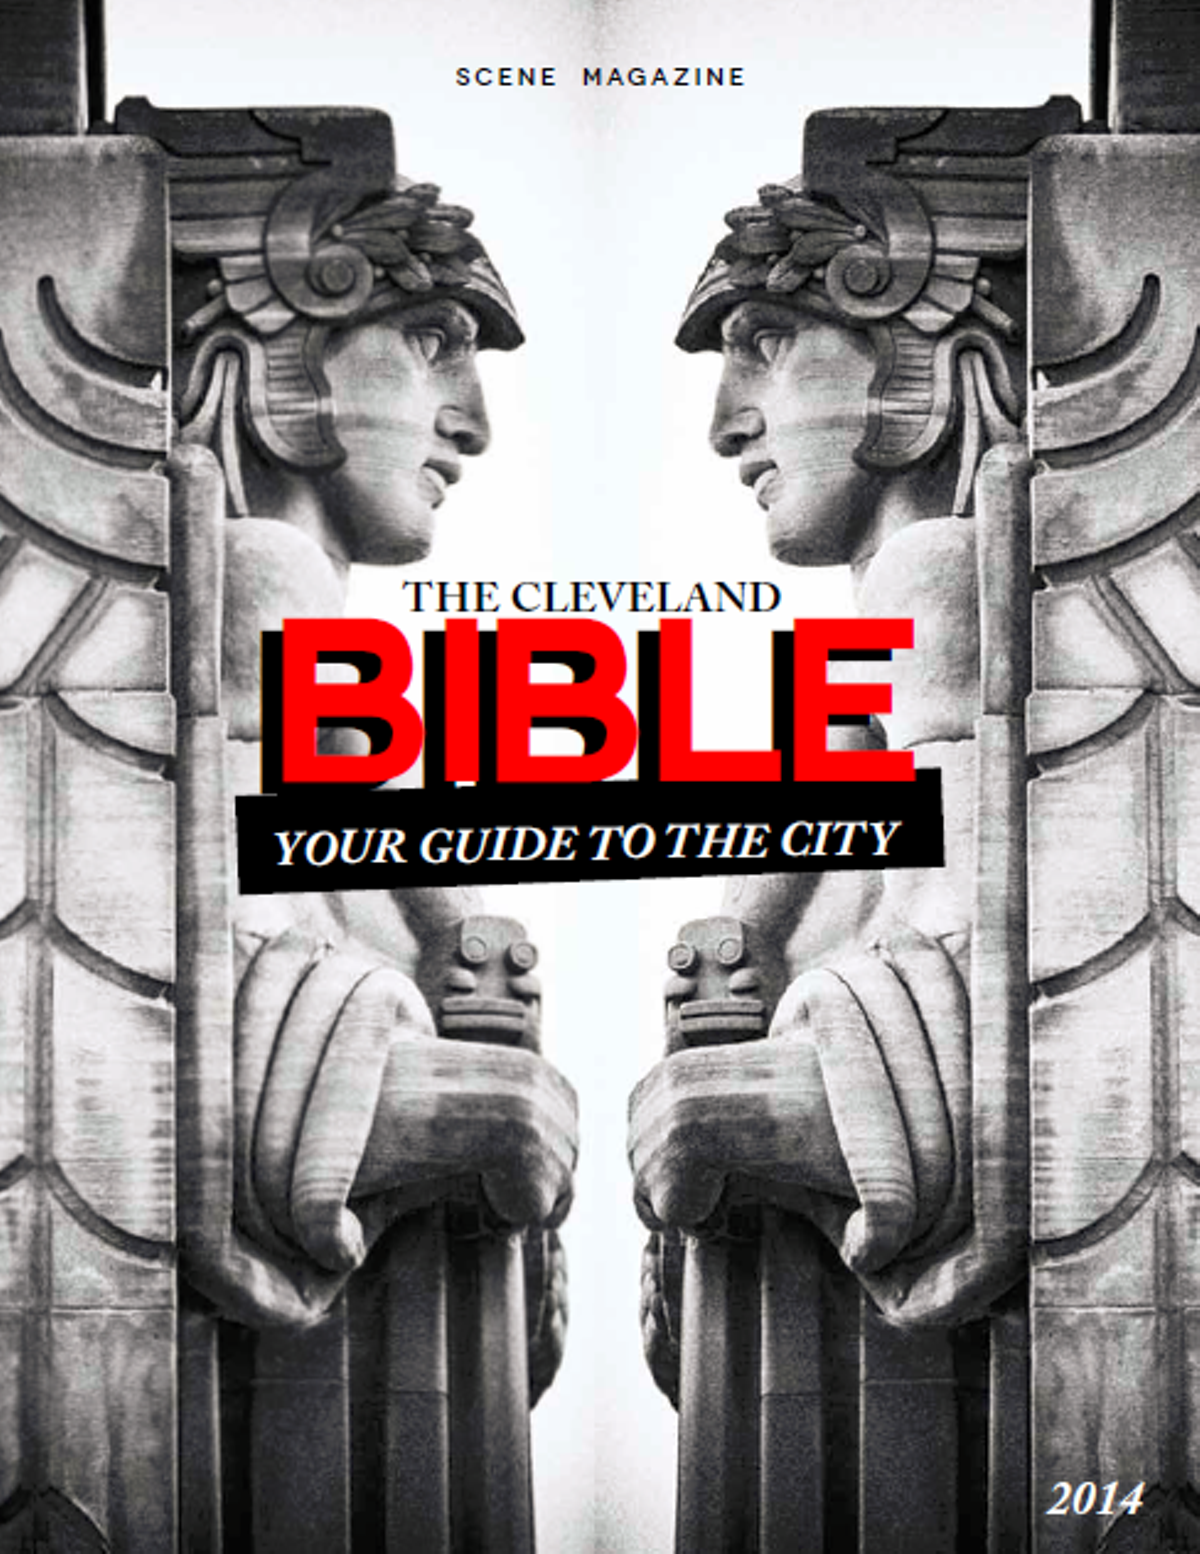 The Cleveland Bible: Your Guide to the City